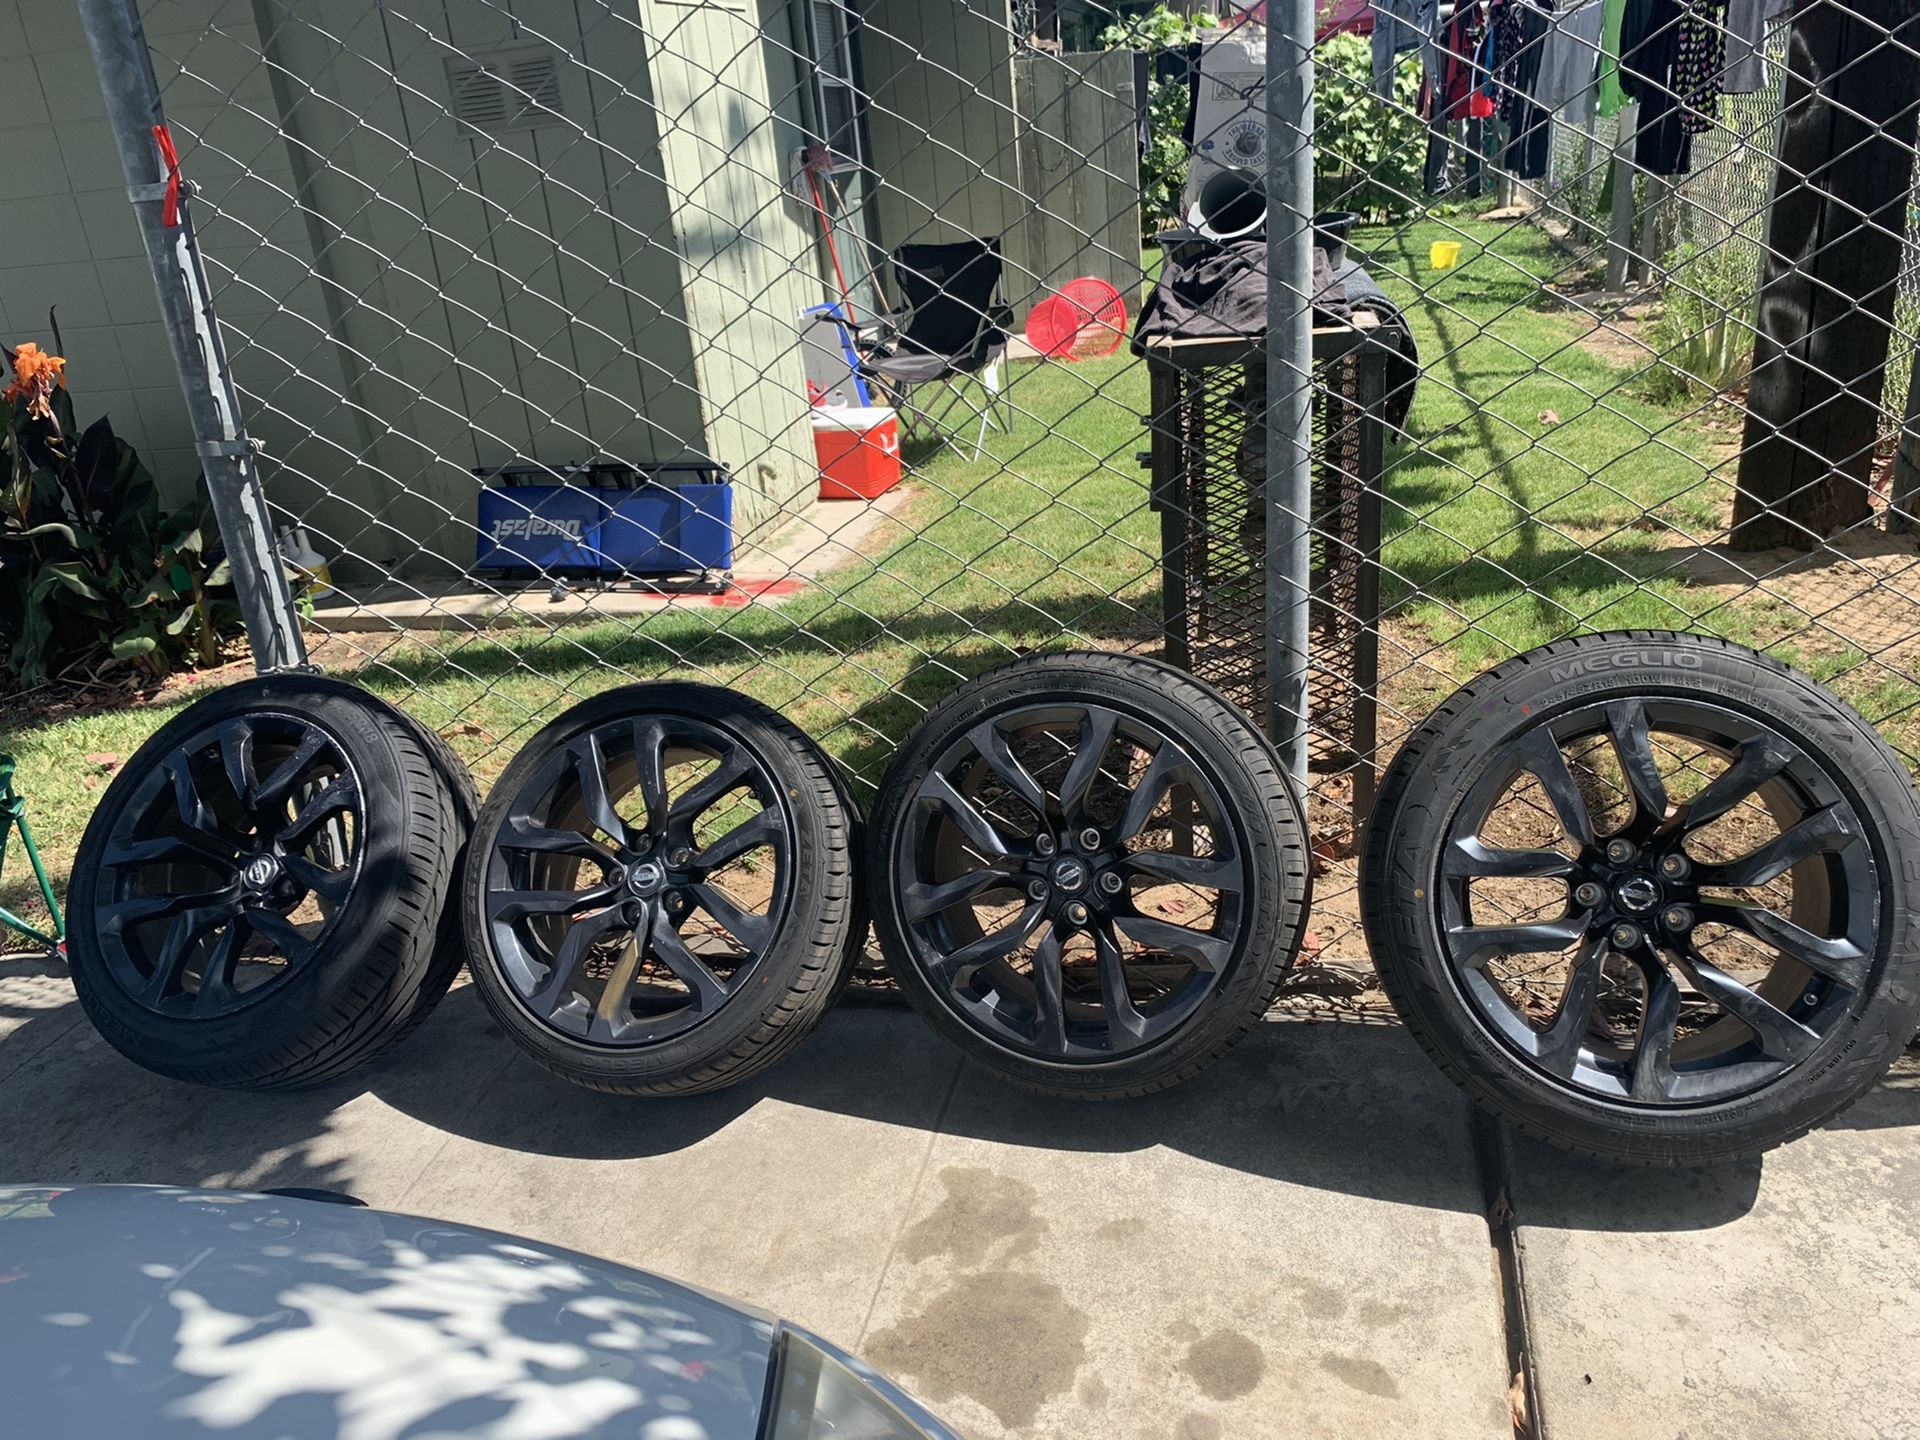 Rims and brand new tires